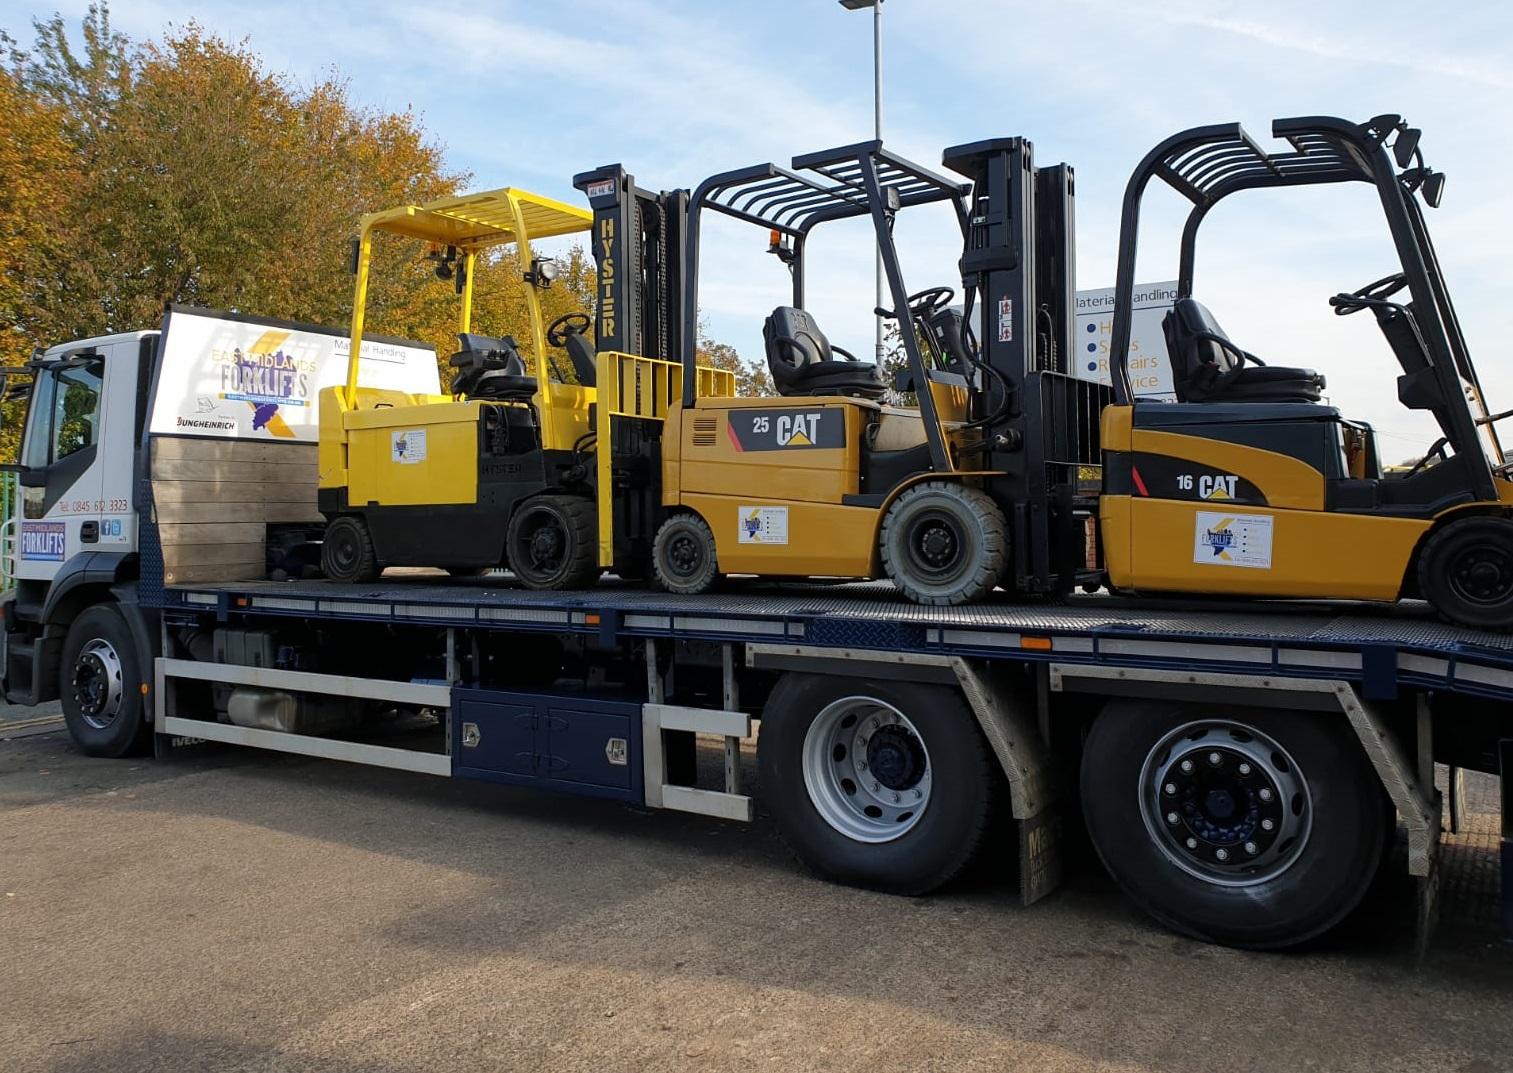 Introducing Our New Delivery Lorry East Midlands Forklifts